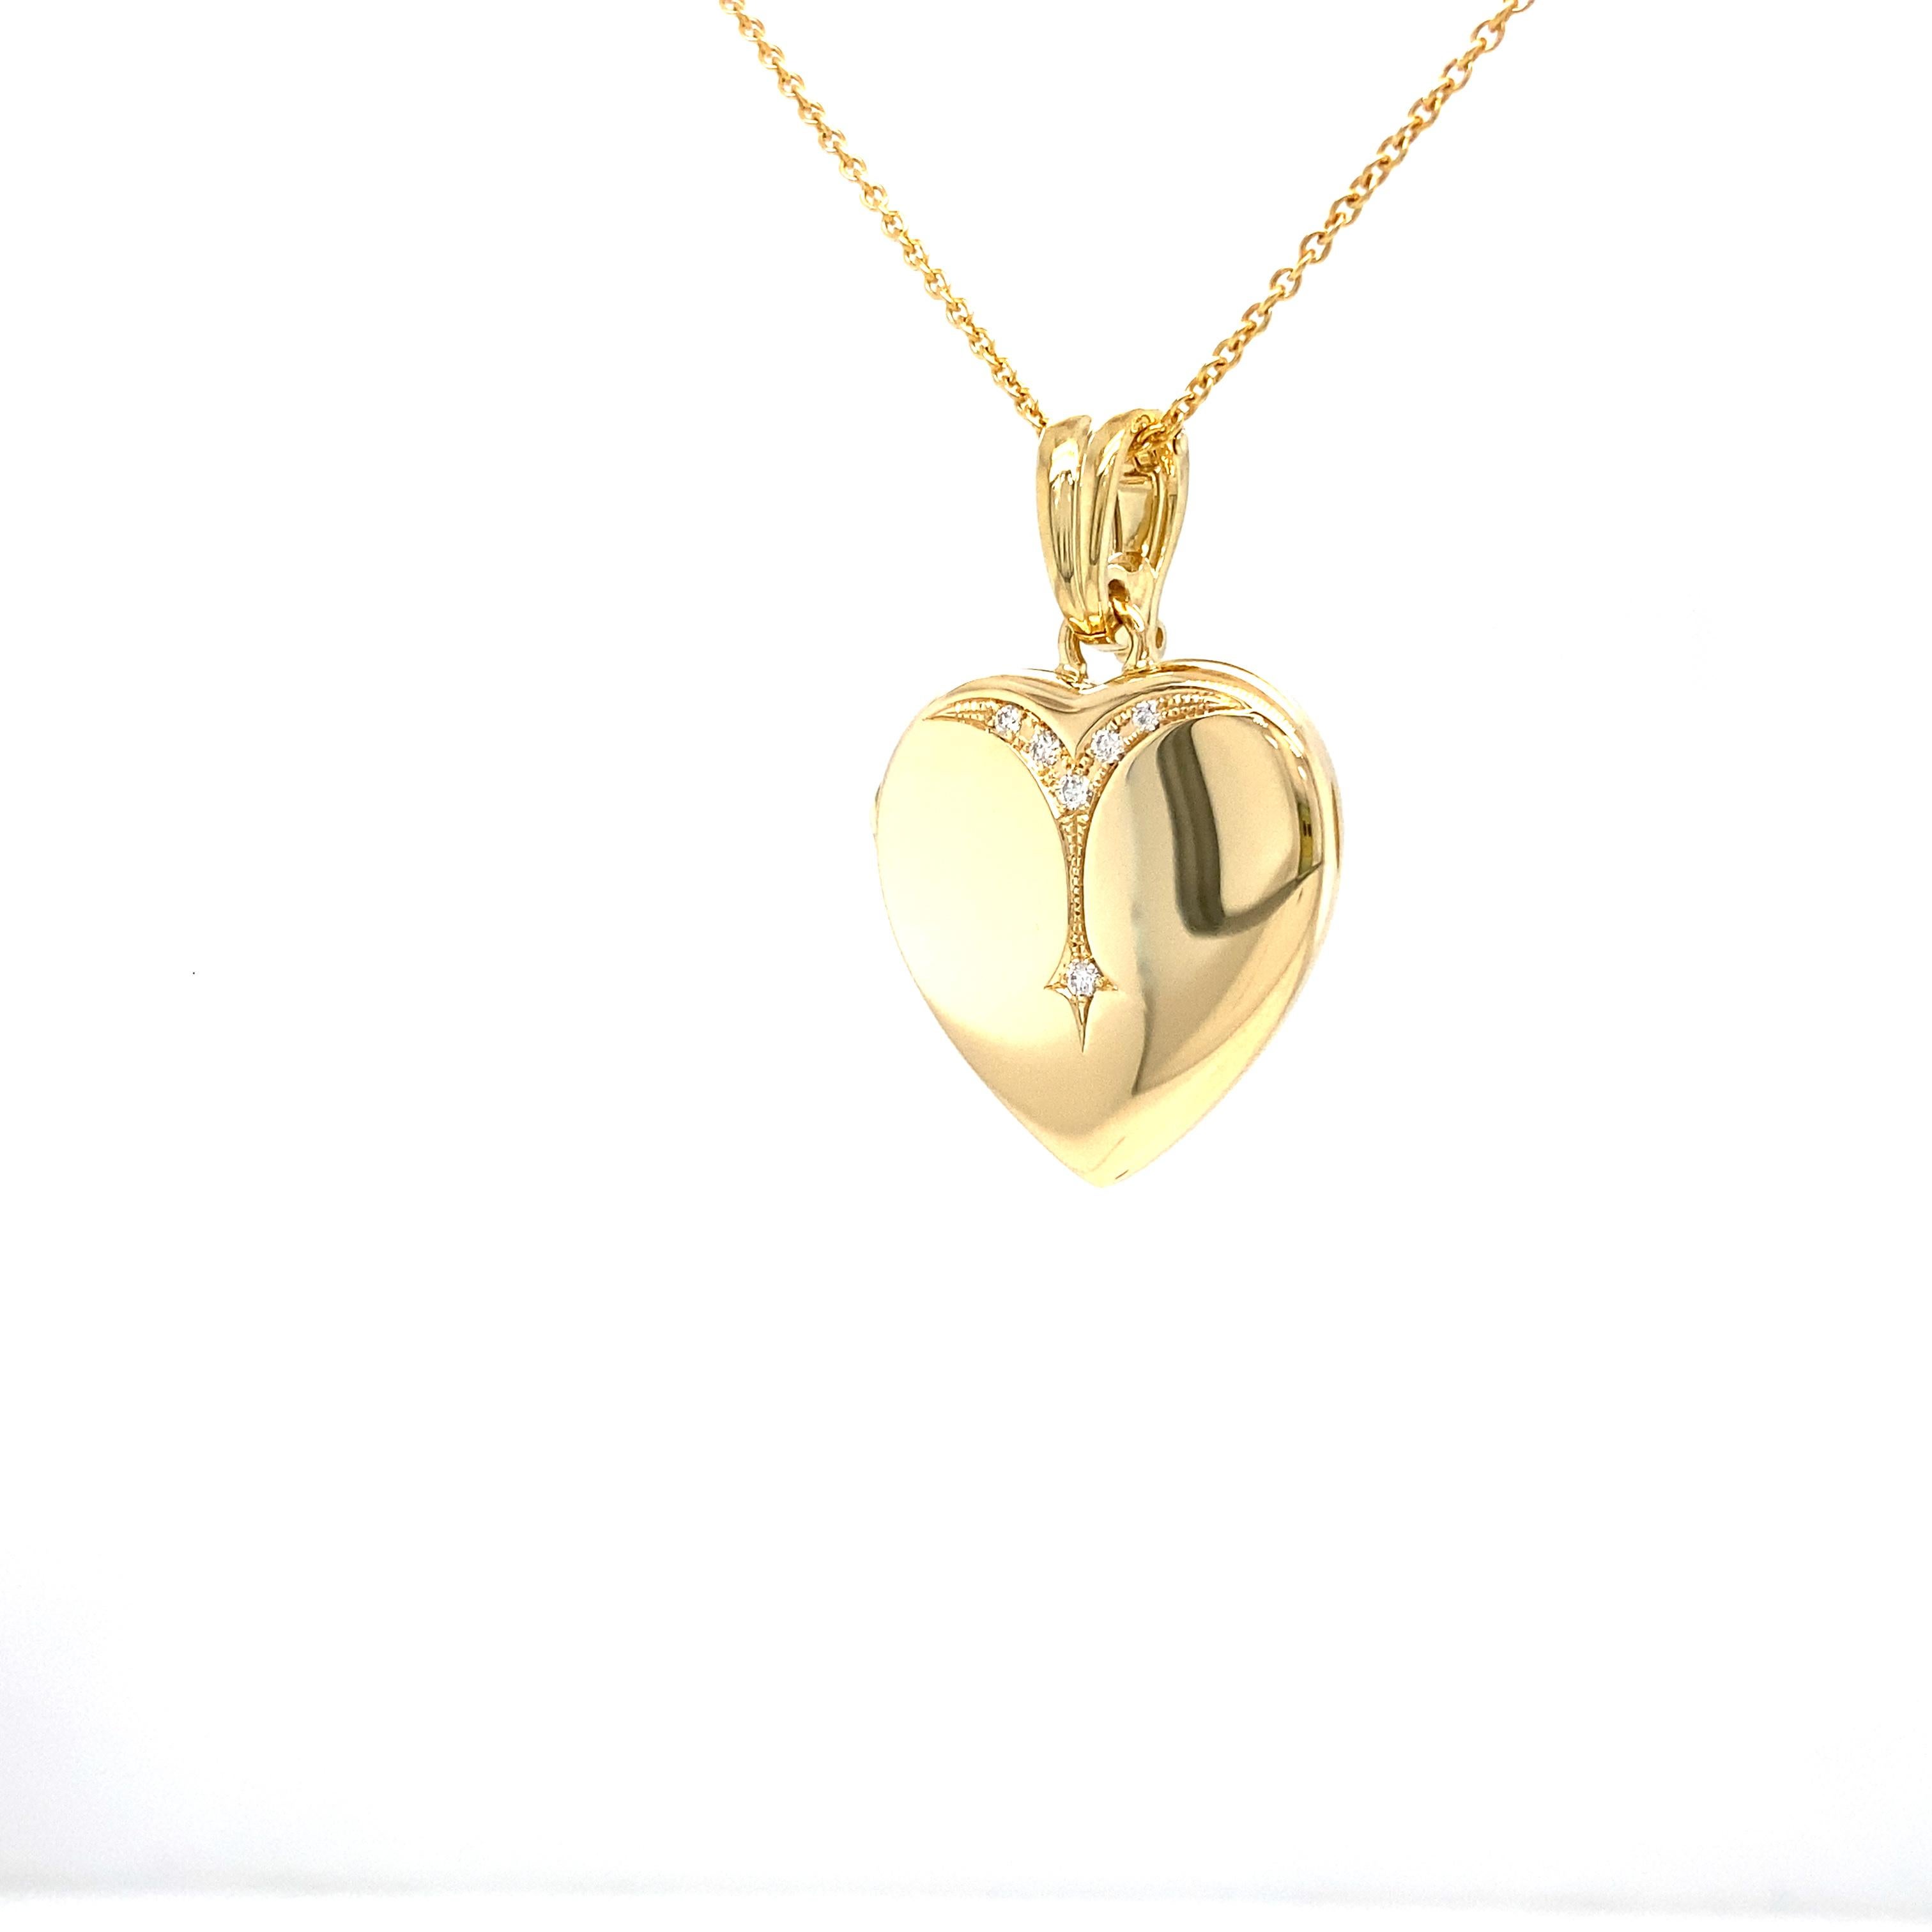 Women's Polished Heart Locket Pendant Necklace - 18k Yellow Gold - 6 Diamonds 0.09 ct For Sale